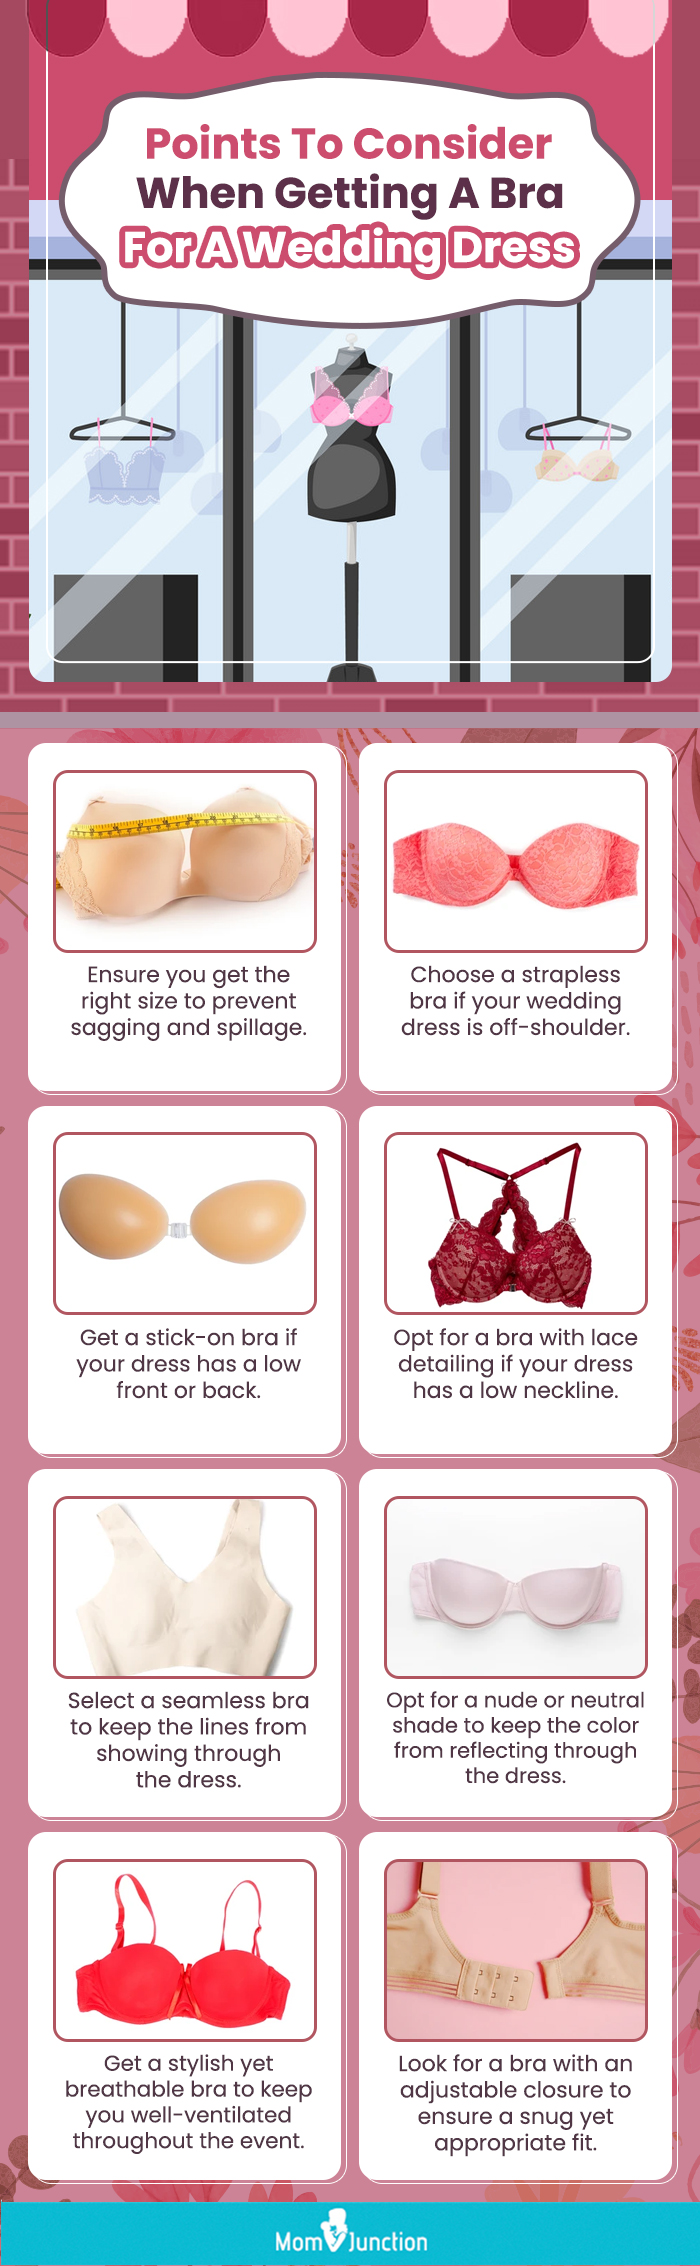 Points To Consider When Getting A Bra For A Wedding Dress (infographic)